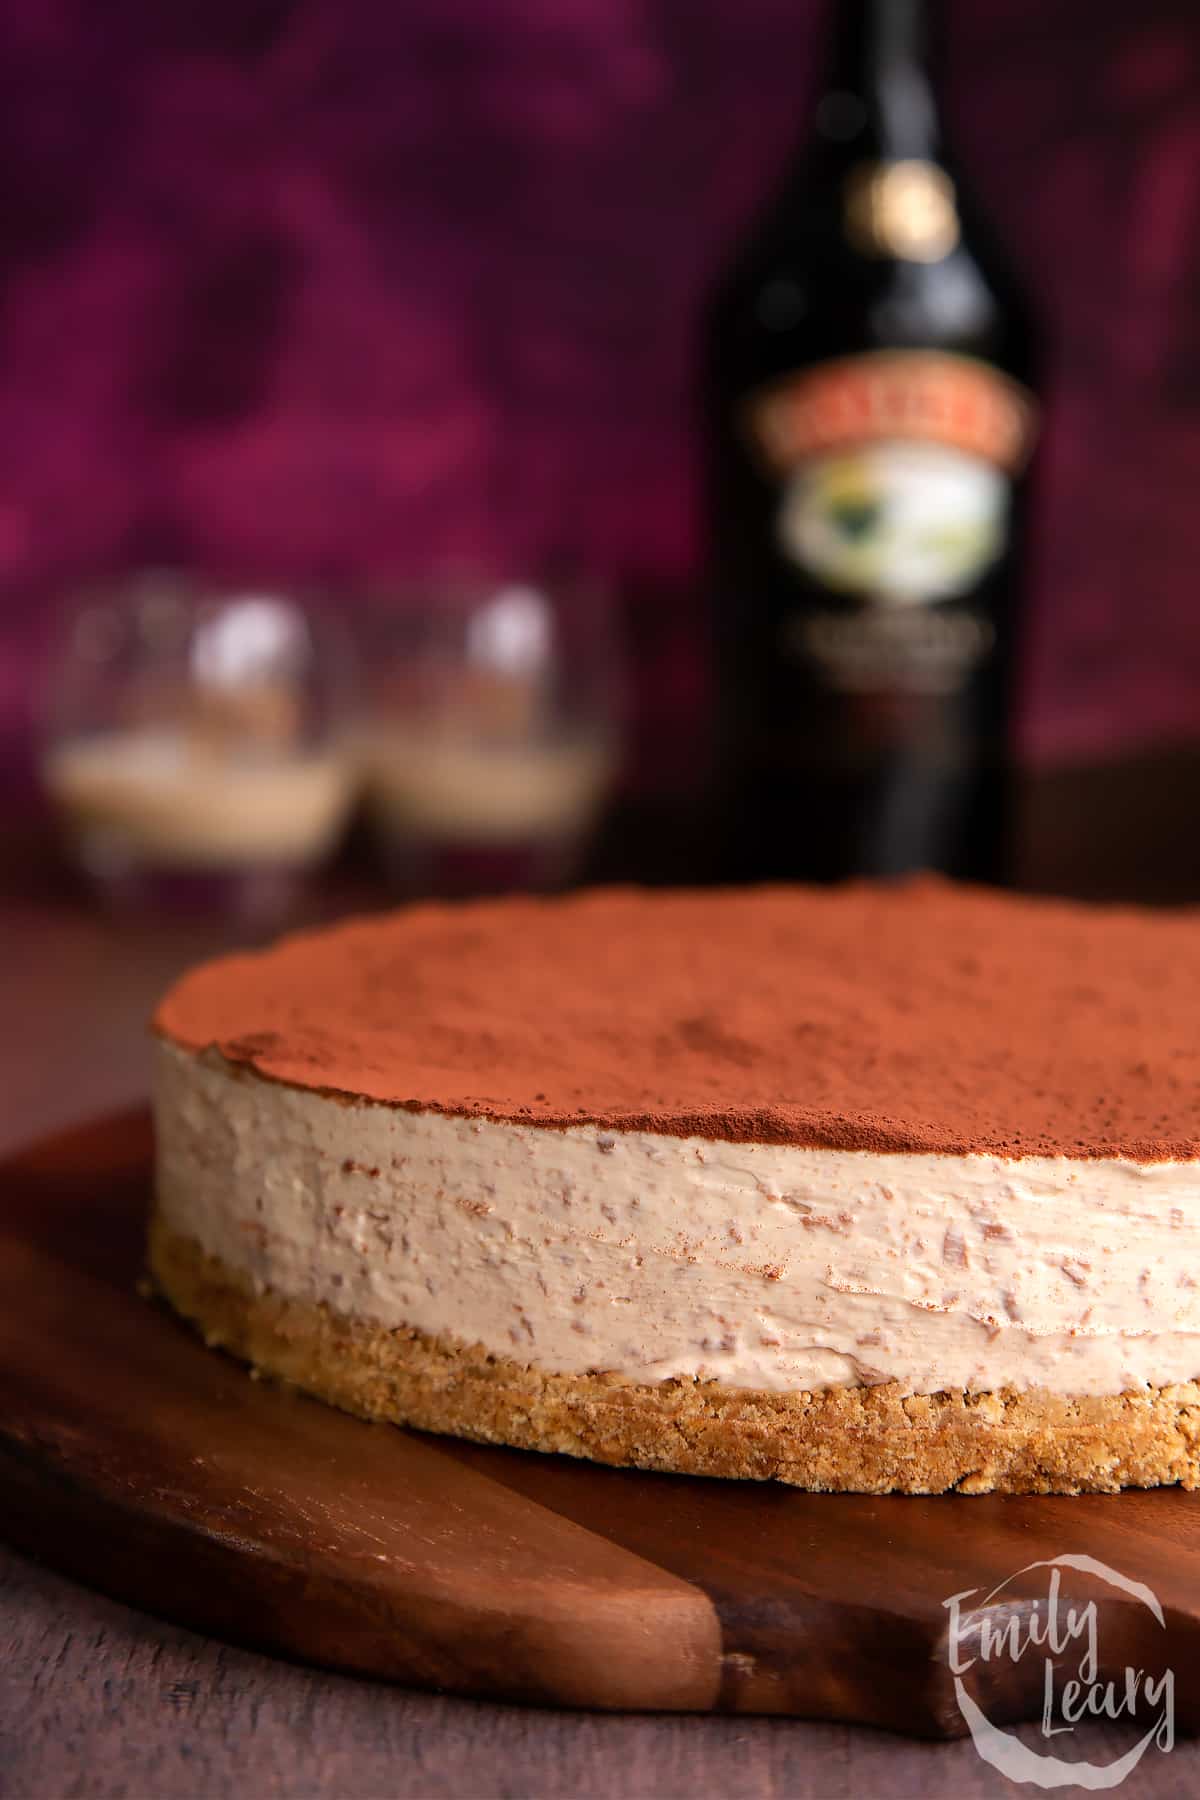 Baileys cheesecake topped with cocoa on a wooden board. A bottle of Baileys is in the background with two glasses.